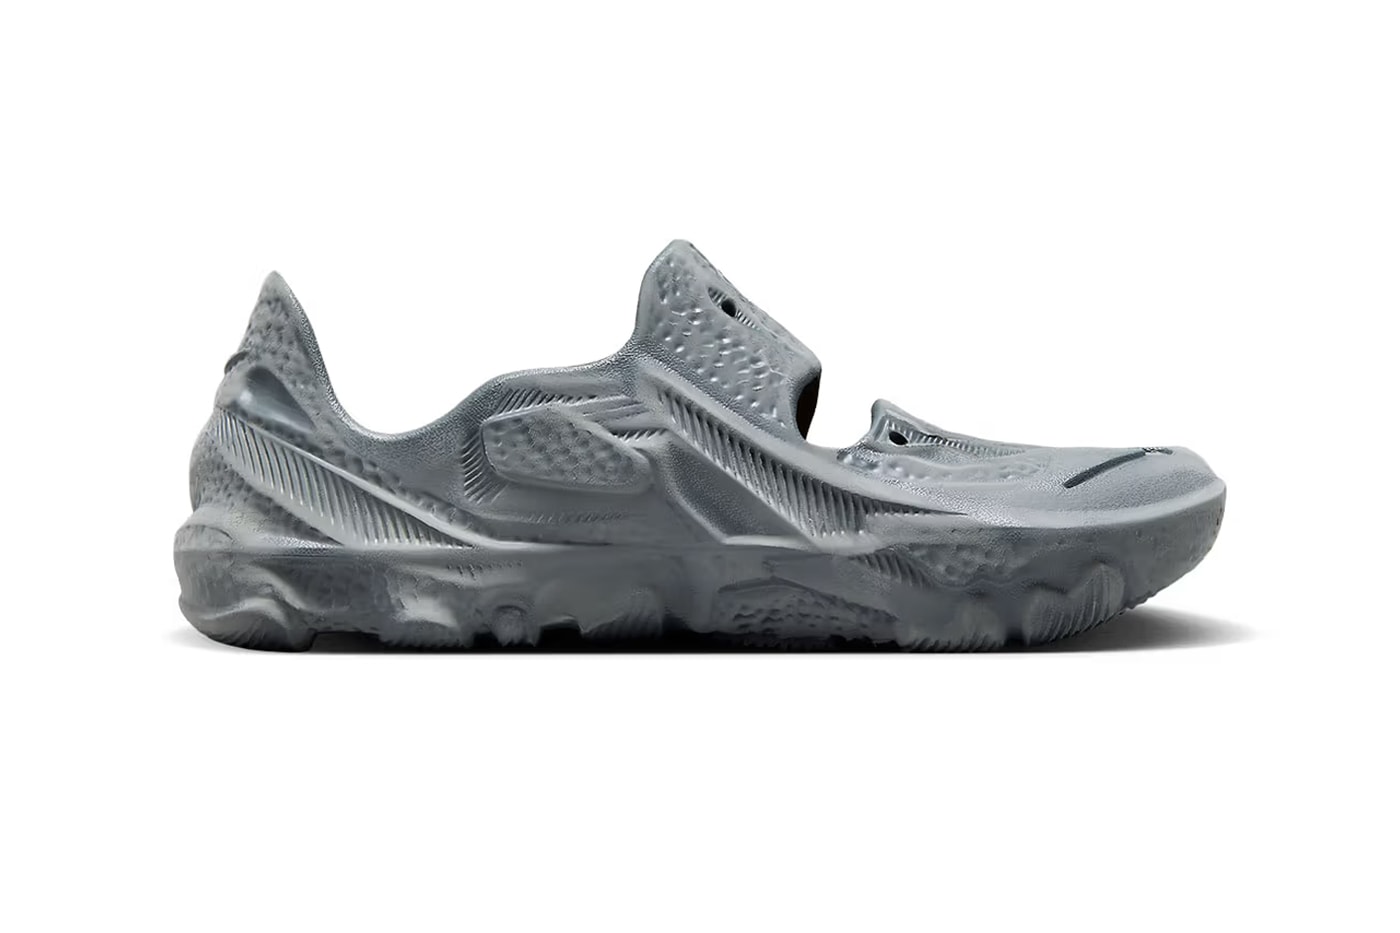 nike ispa universal gray DM0886 001 release date info store list buying guide photos price 